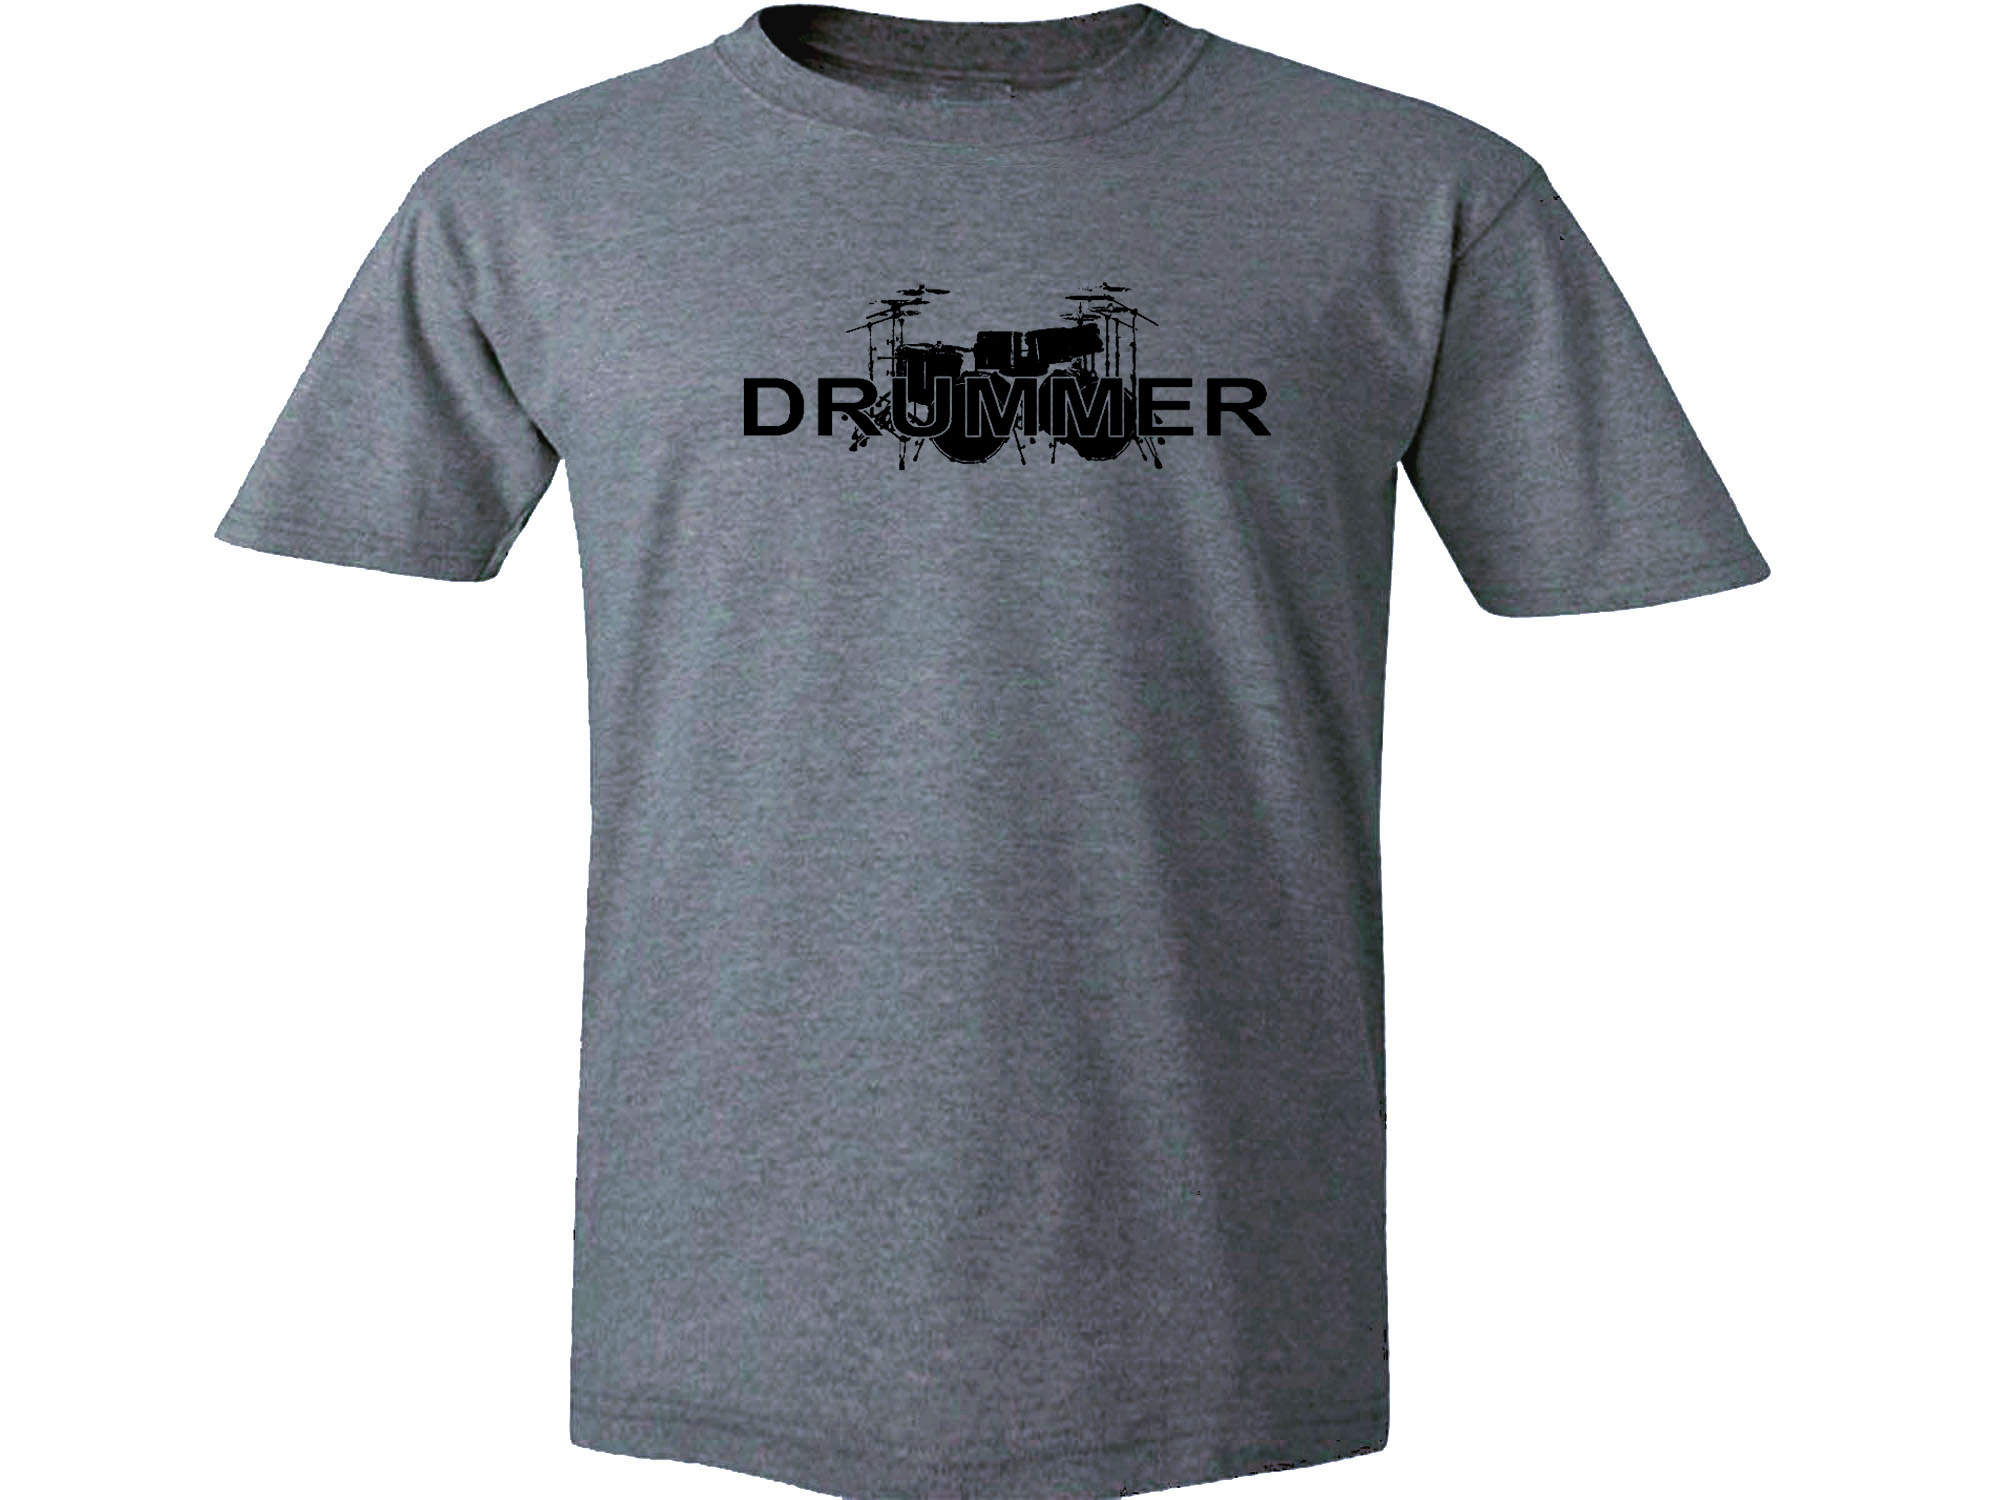 Drummer drums player t-shirt great music gift